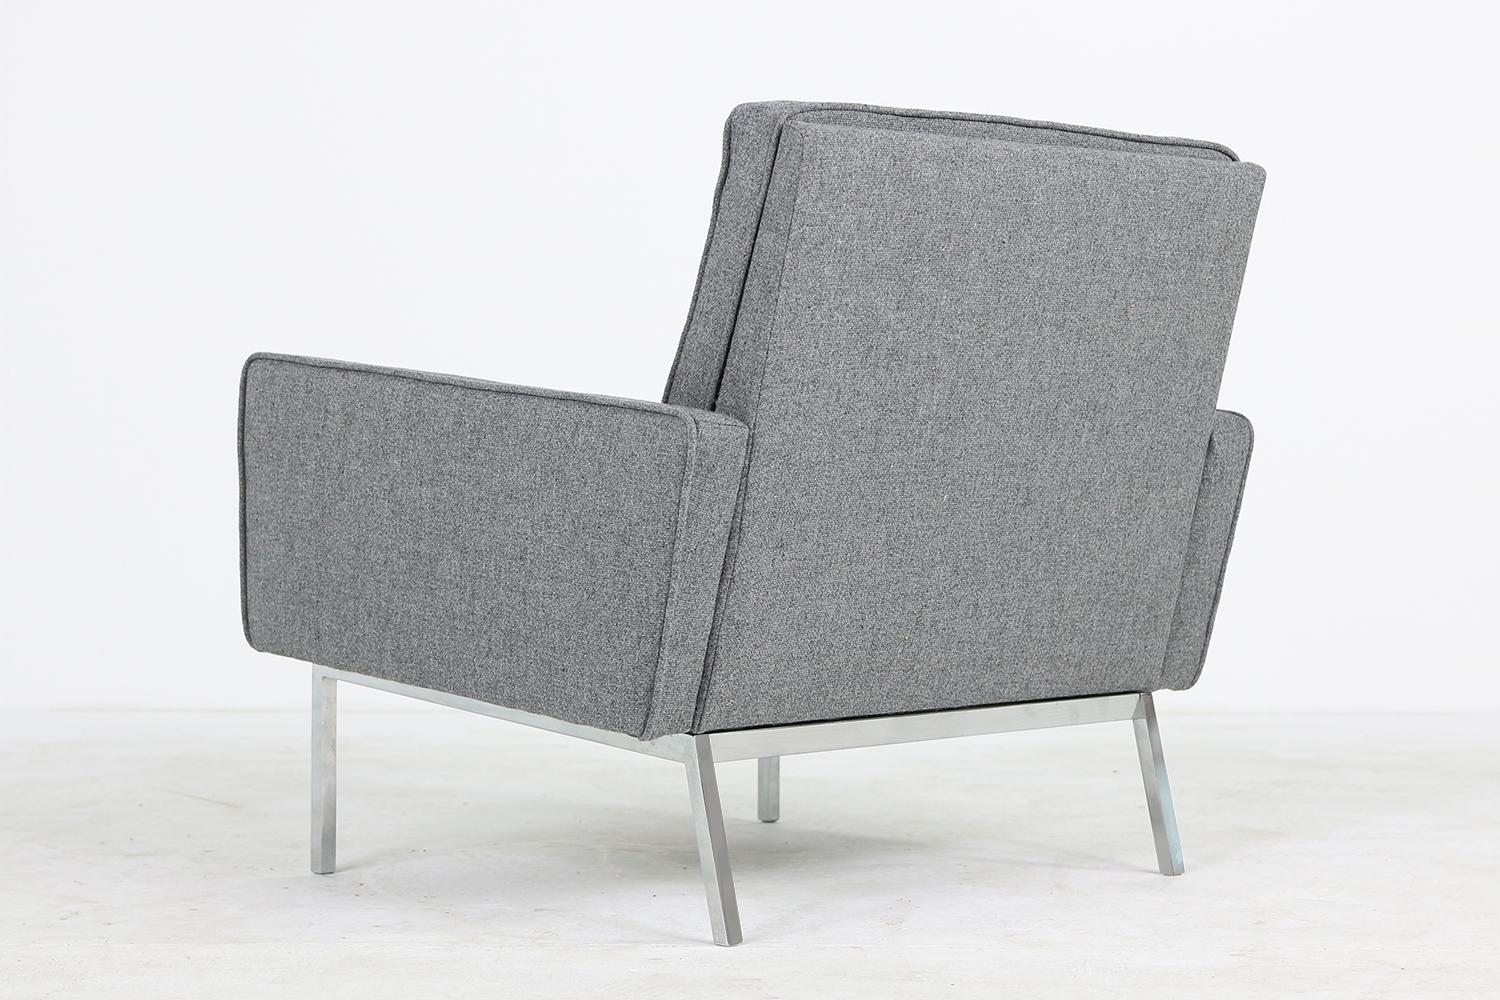 Rare 1950s Florence Knoll Lounge Chair Mod. 65a Knoll International Armchair In Good Condition For Sale In Hamminkeln, DE